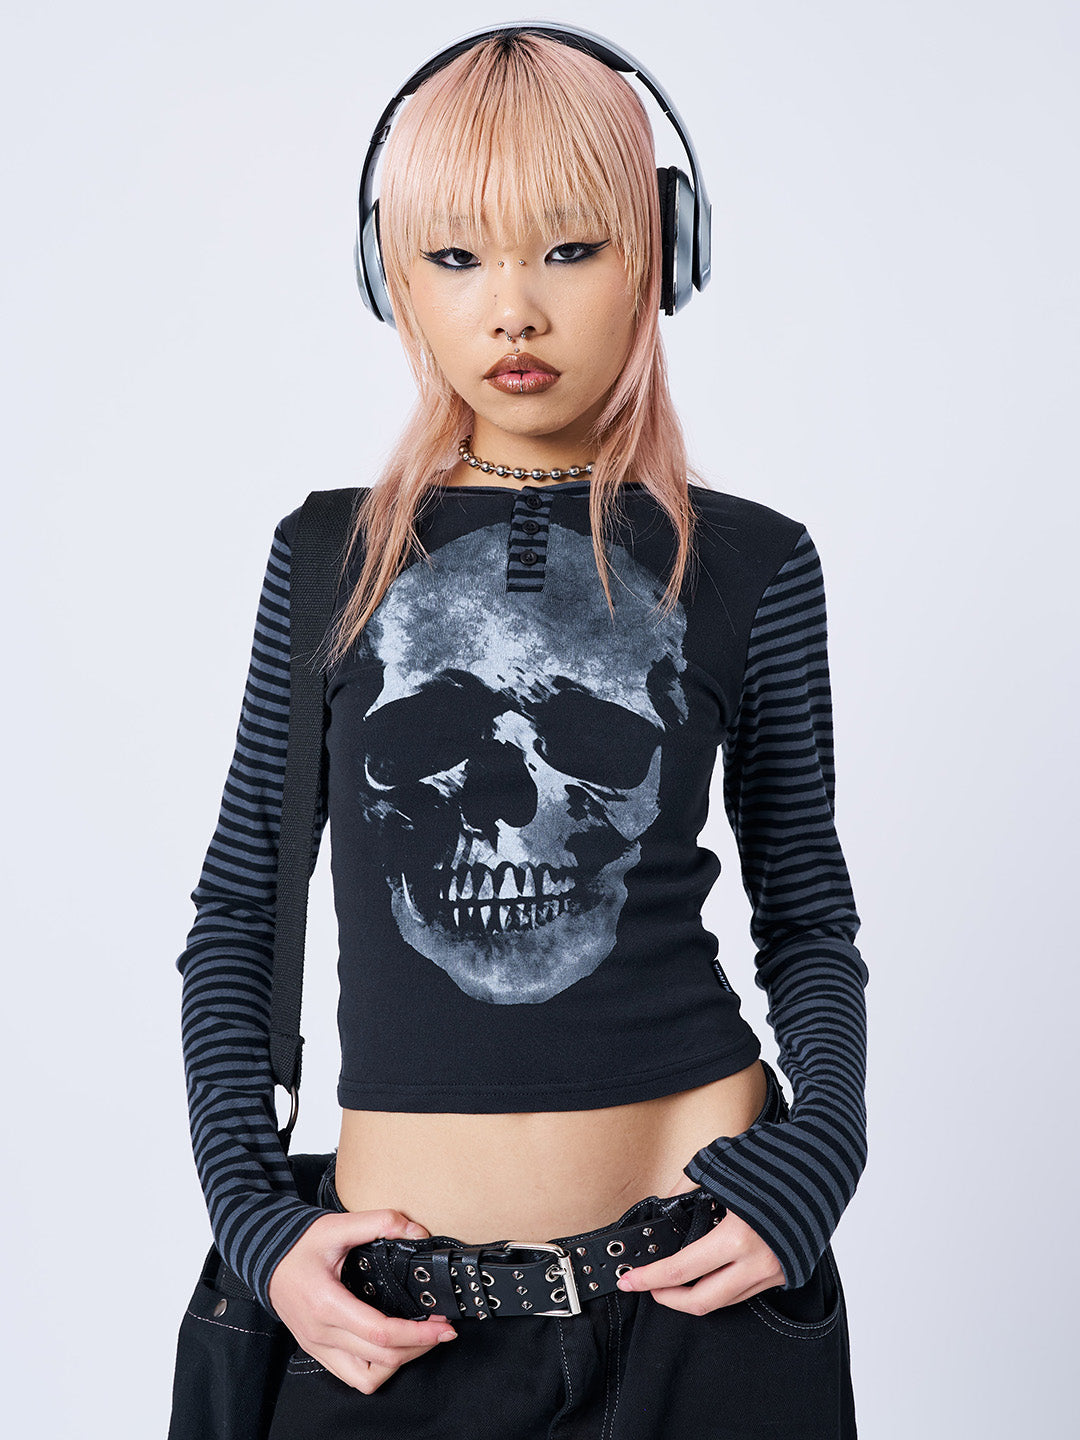 Black Long Sleeve Top with Skull Graphic & Striped Sleeves - Y2K Grunge ...